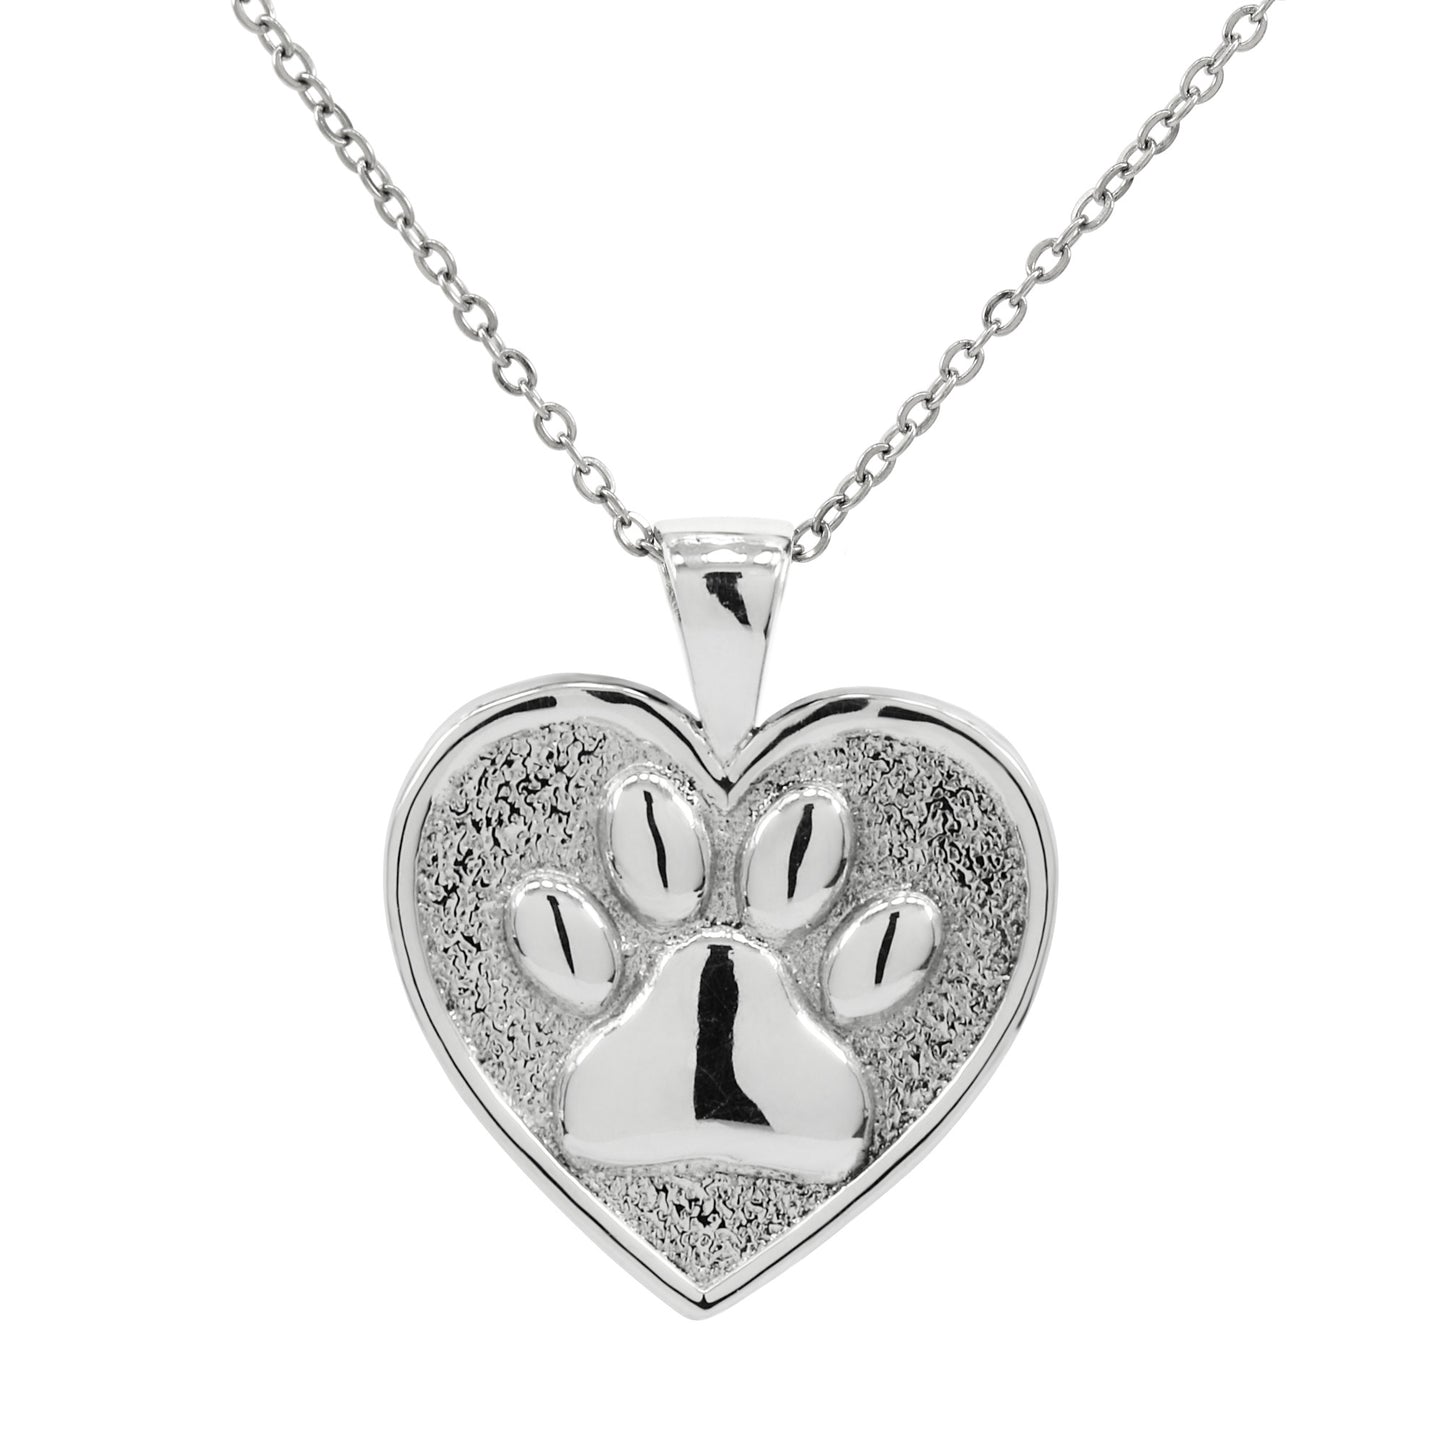 925 Sterling Silver Cat or Dog Paw Print Pendant With 22" Hypoallergenic Cable Chain Necklace